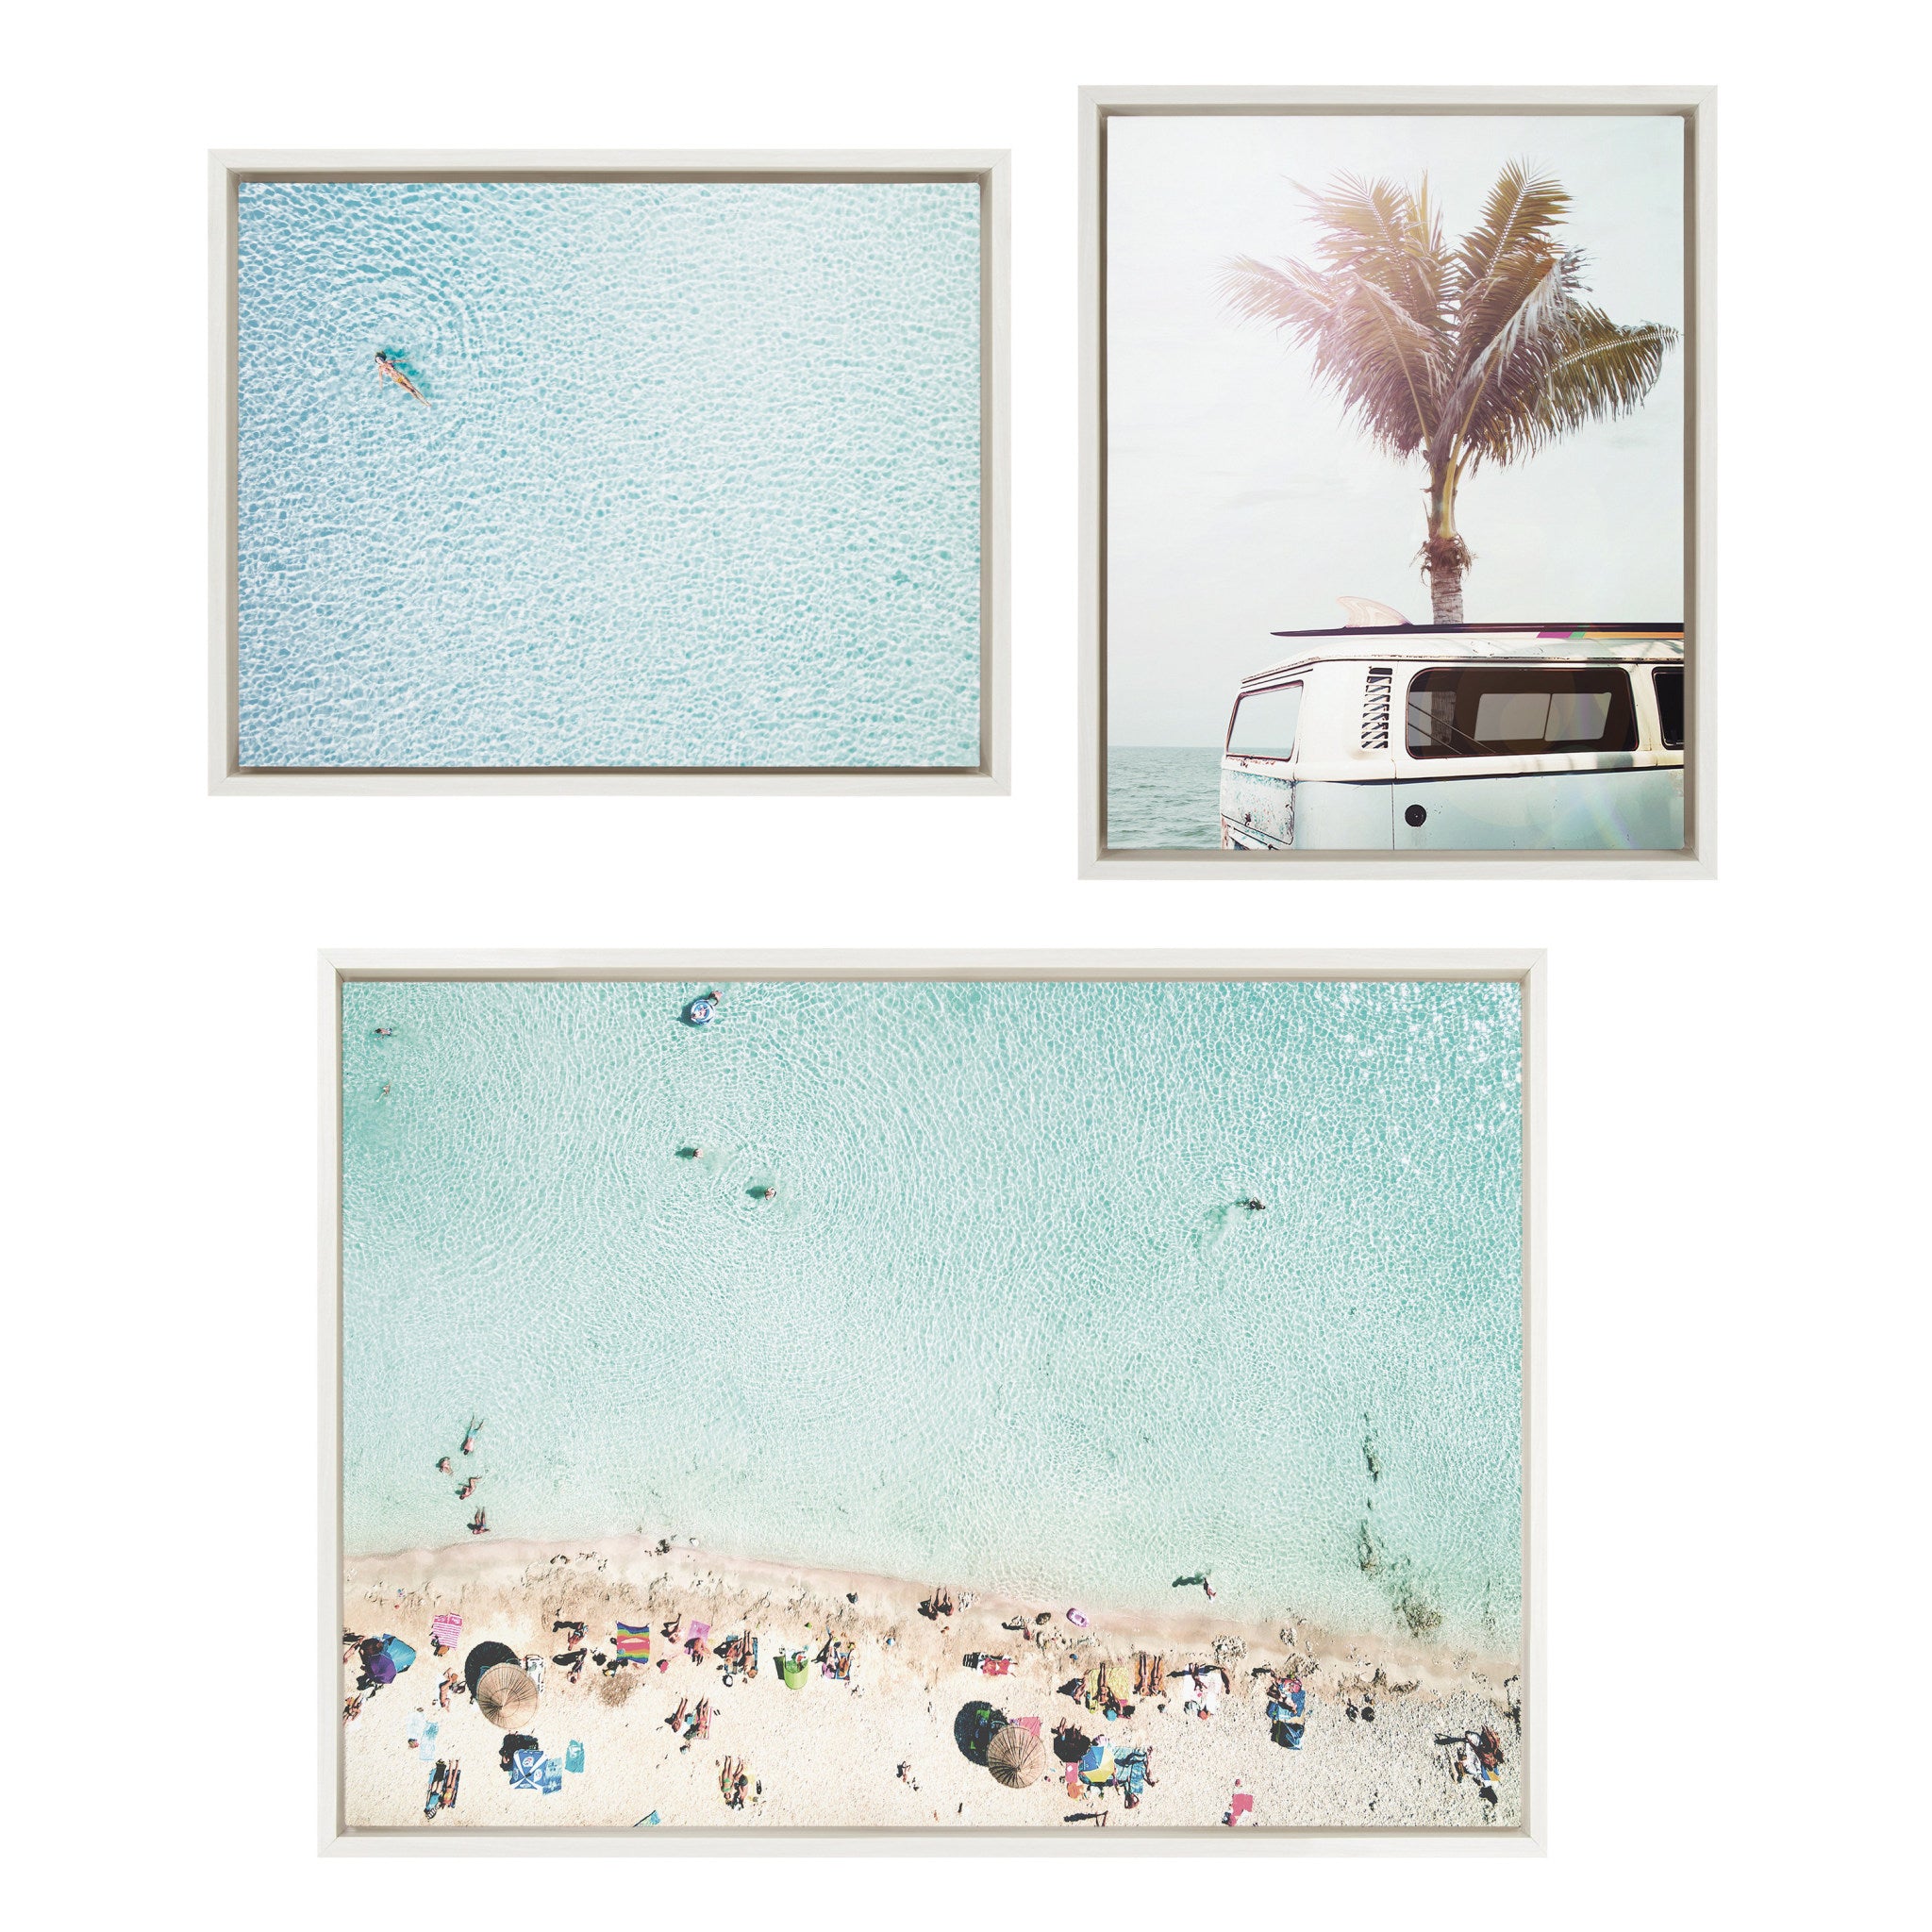 Sylvie Turquoise Beach from Above 2, Blue Beach Van and Woman Floating Framed Canvas by Amy Peterson Art Studio